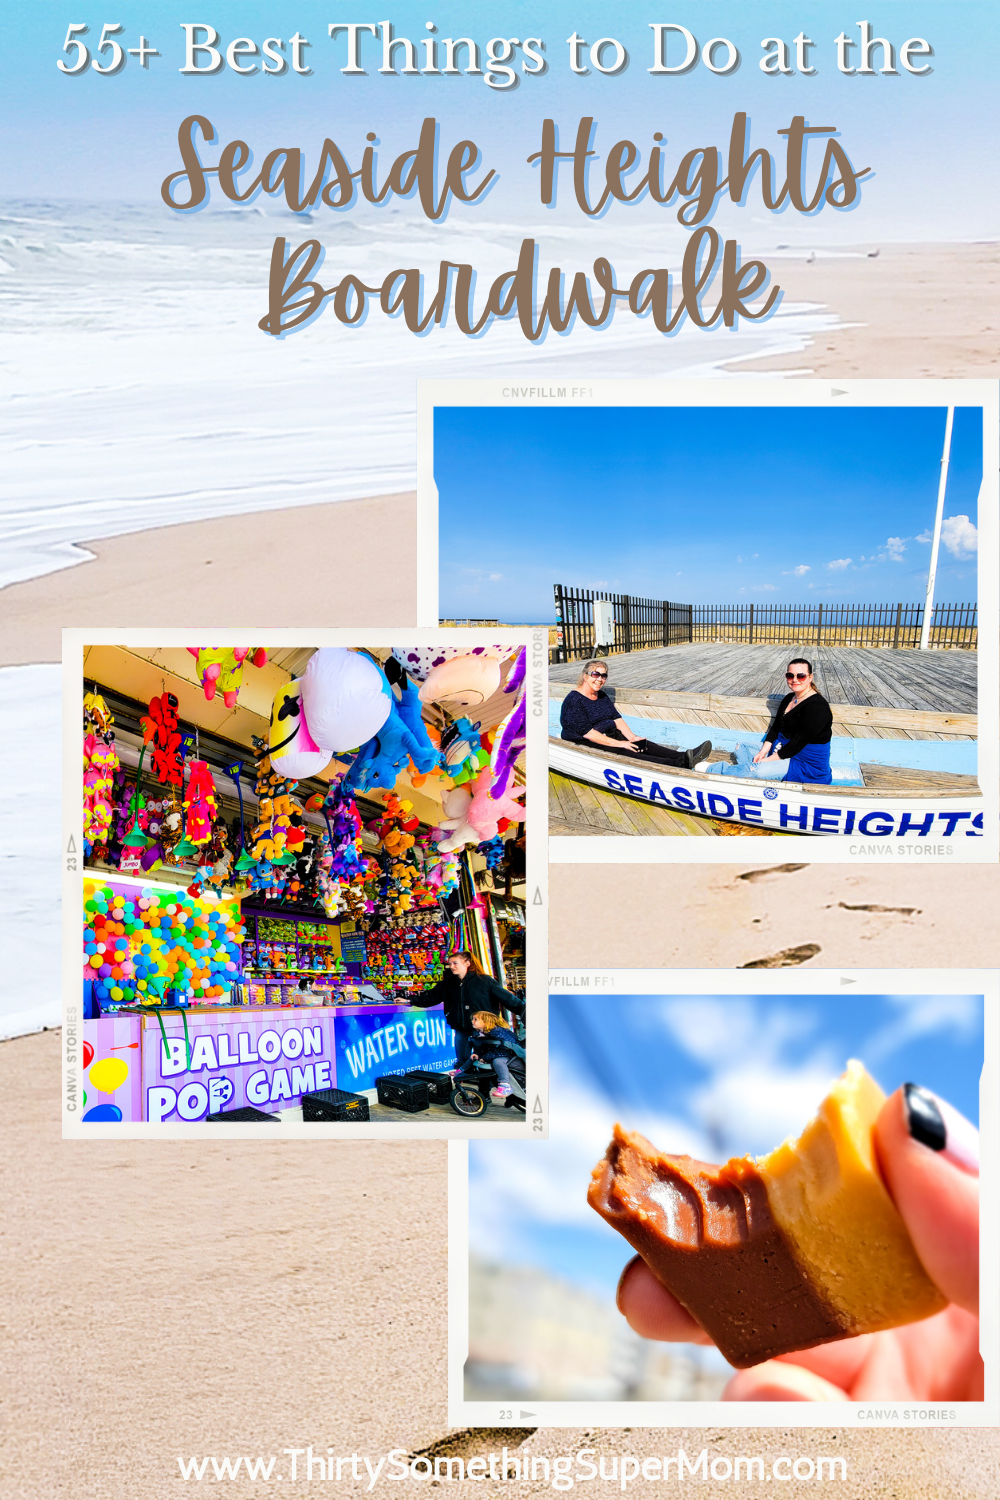 Plan your visit to the Seaside Heights Boardwalk and see all of the fun, food, and unique attractions this resort community has to offer. 